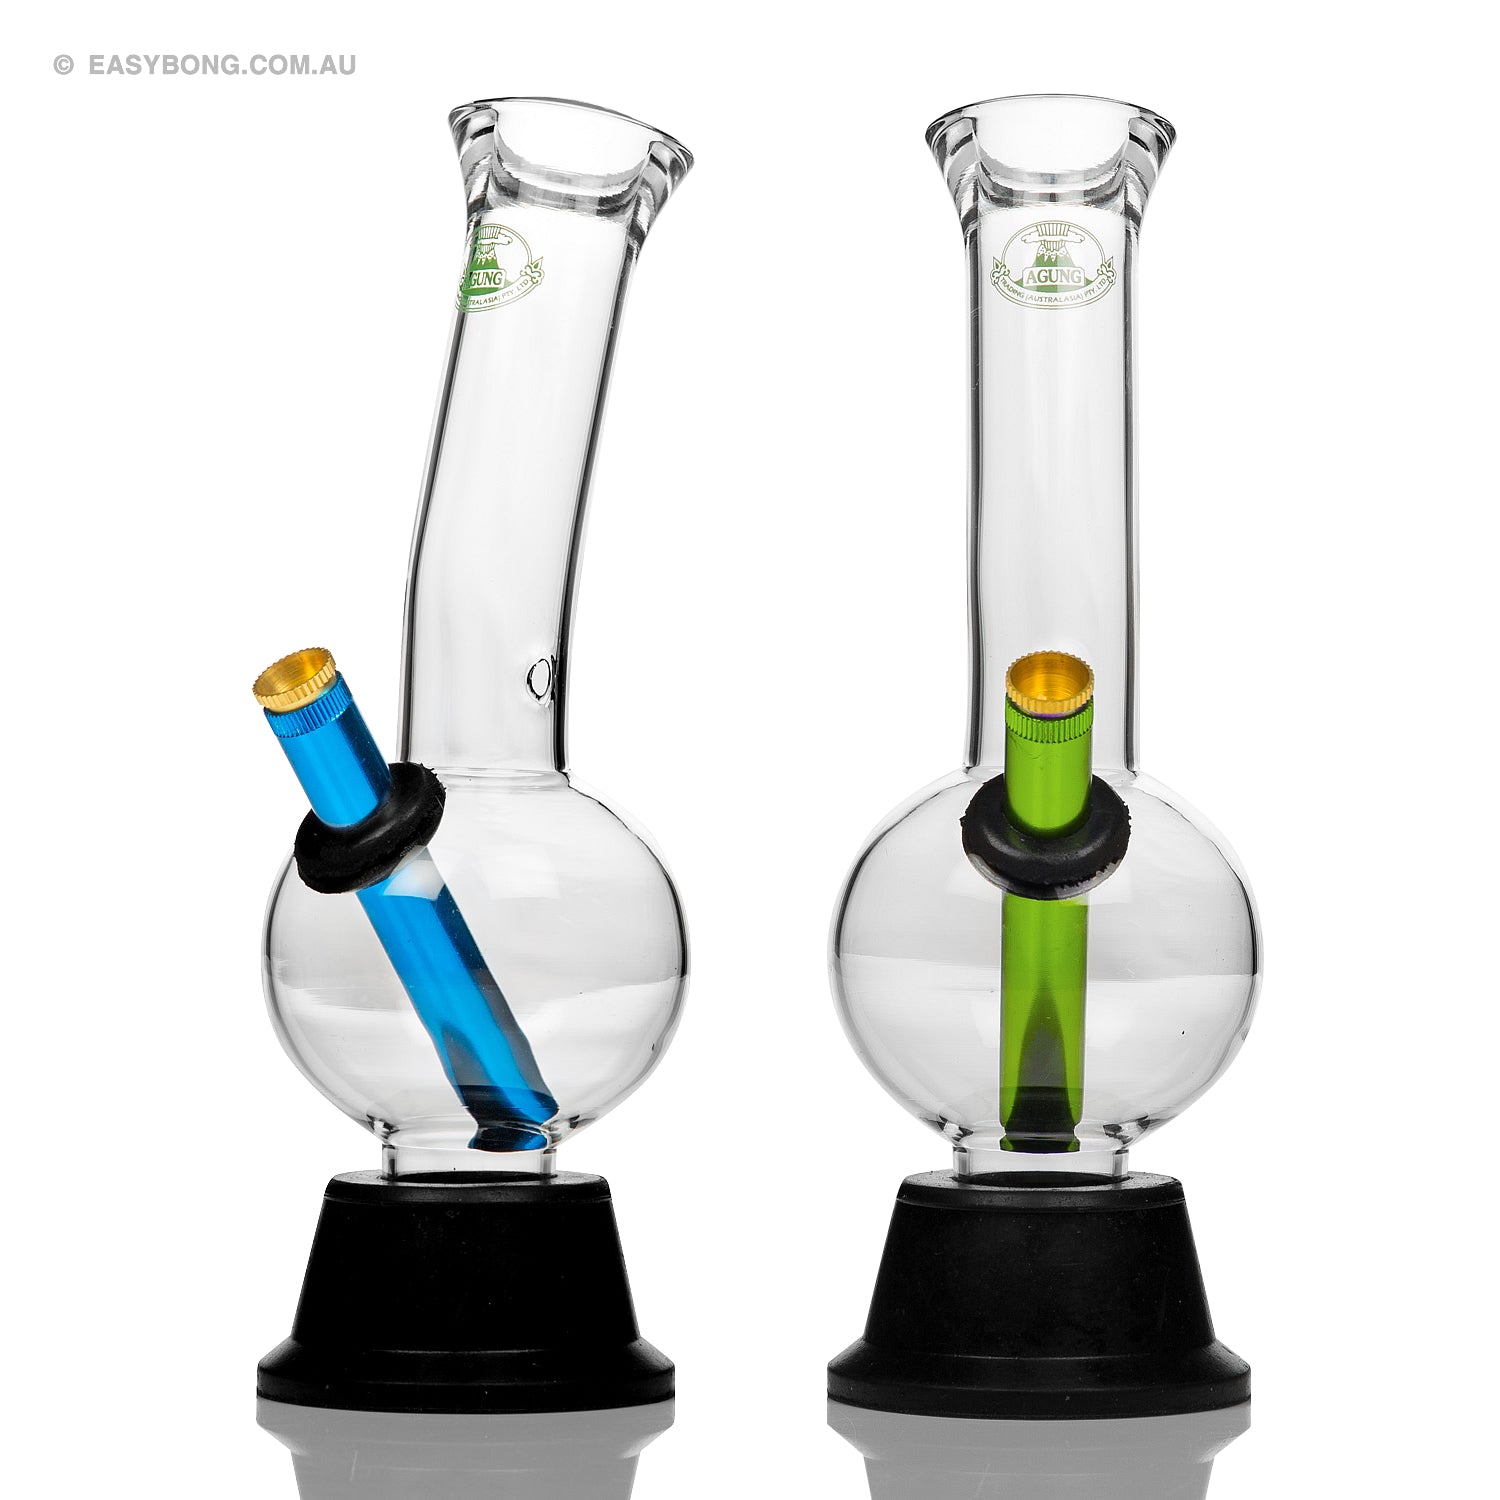 Agung Aussie style cheap glass bongs, very popular with cannabis smokers, with free shipping Austra wide.